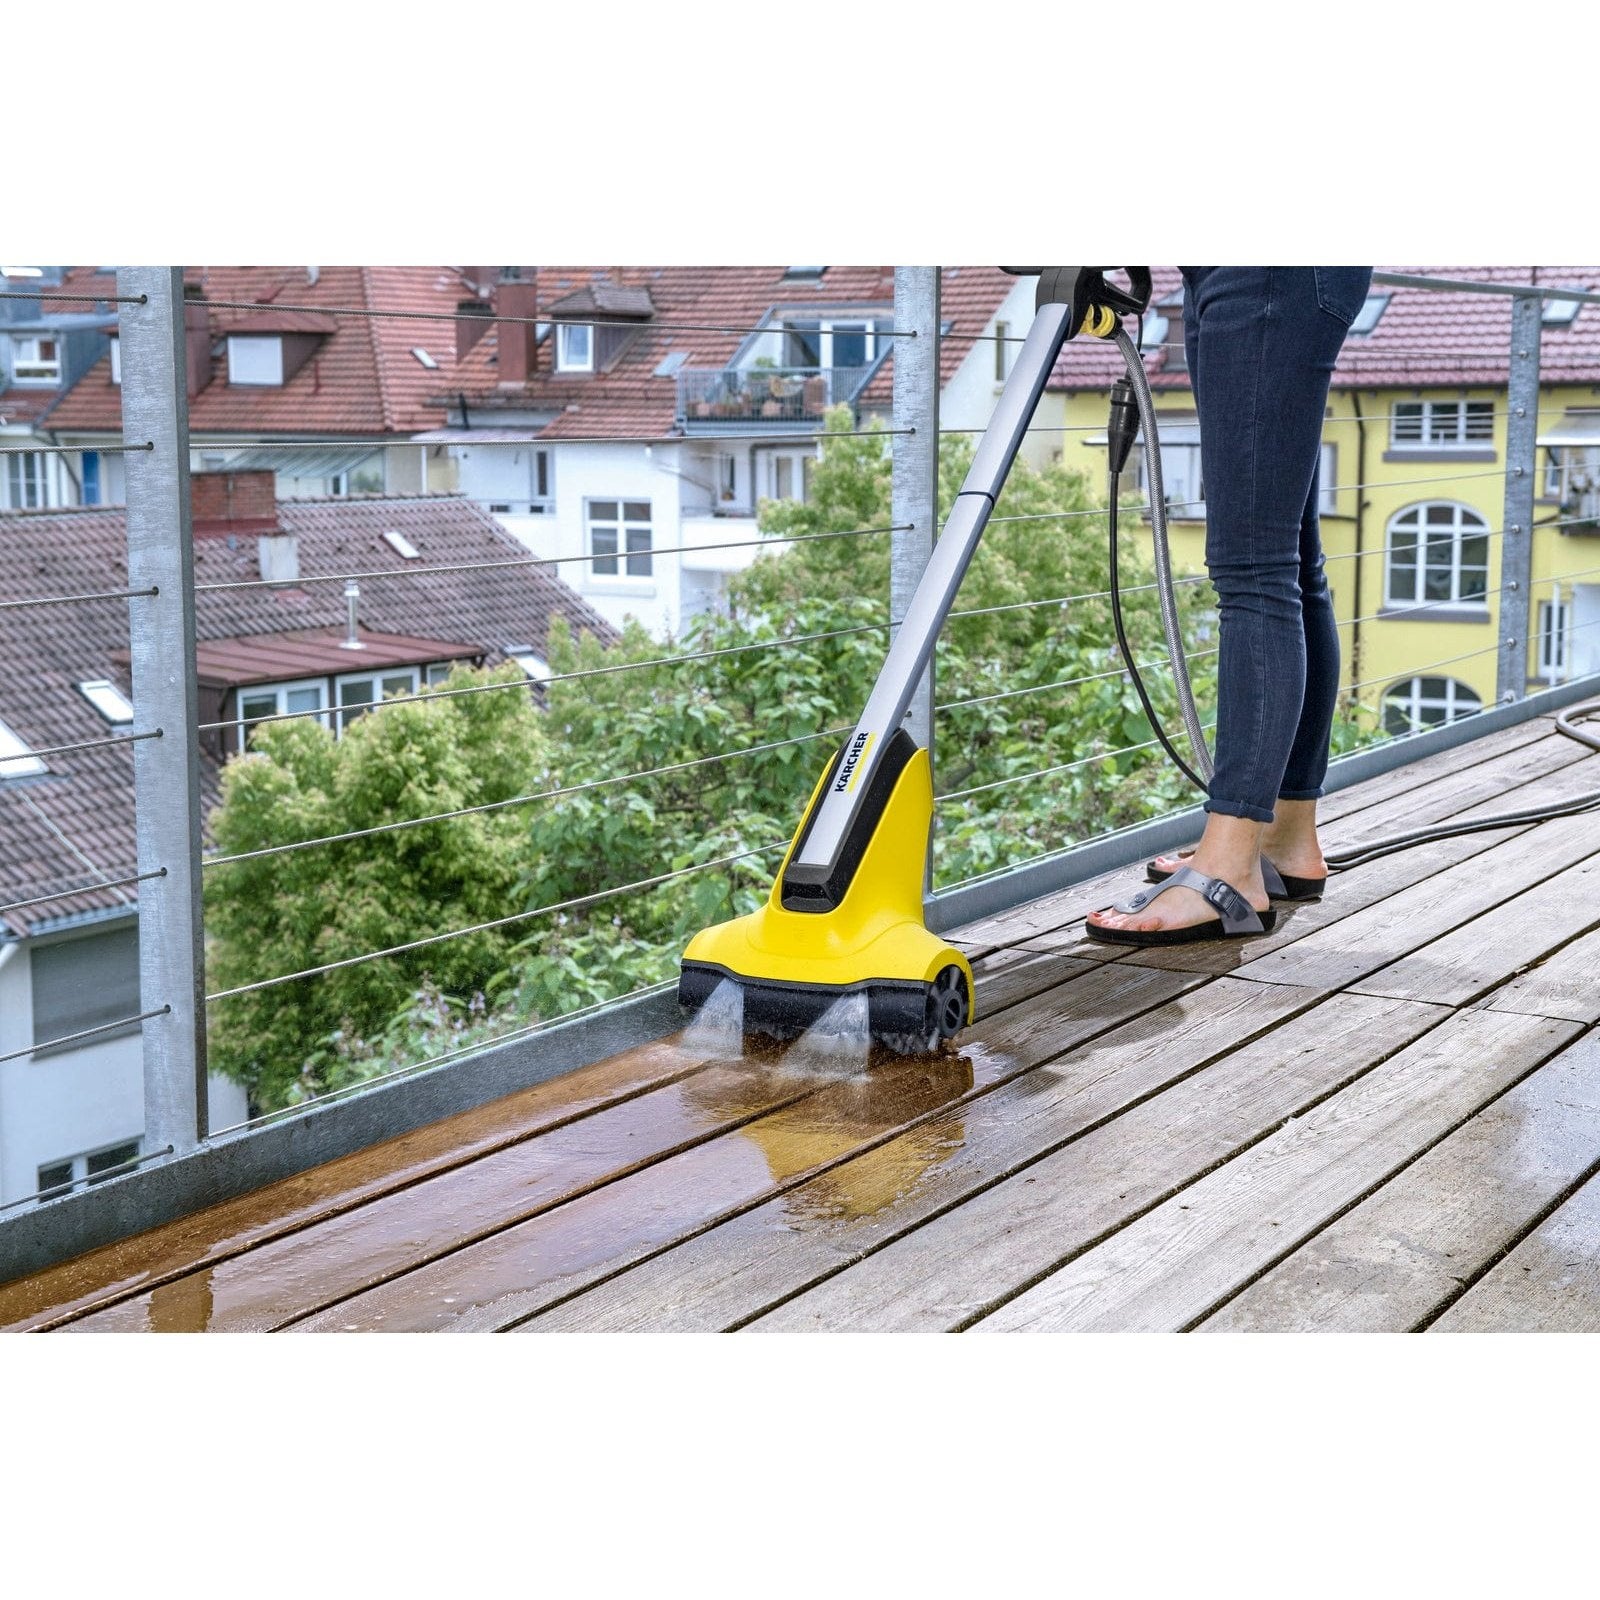 Karcher Surface Cleaner Pcl 4 Patio Cleaner | Supply Master | Accra, Ghana Pressure Washer Buy Tools hardware Building materials